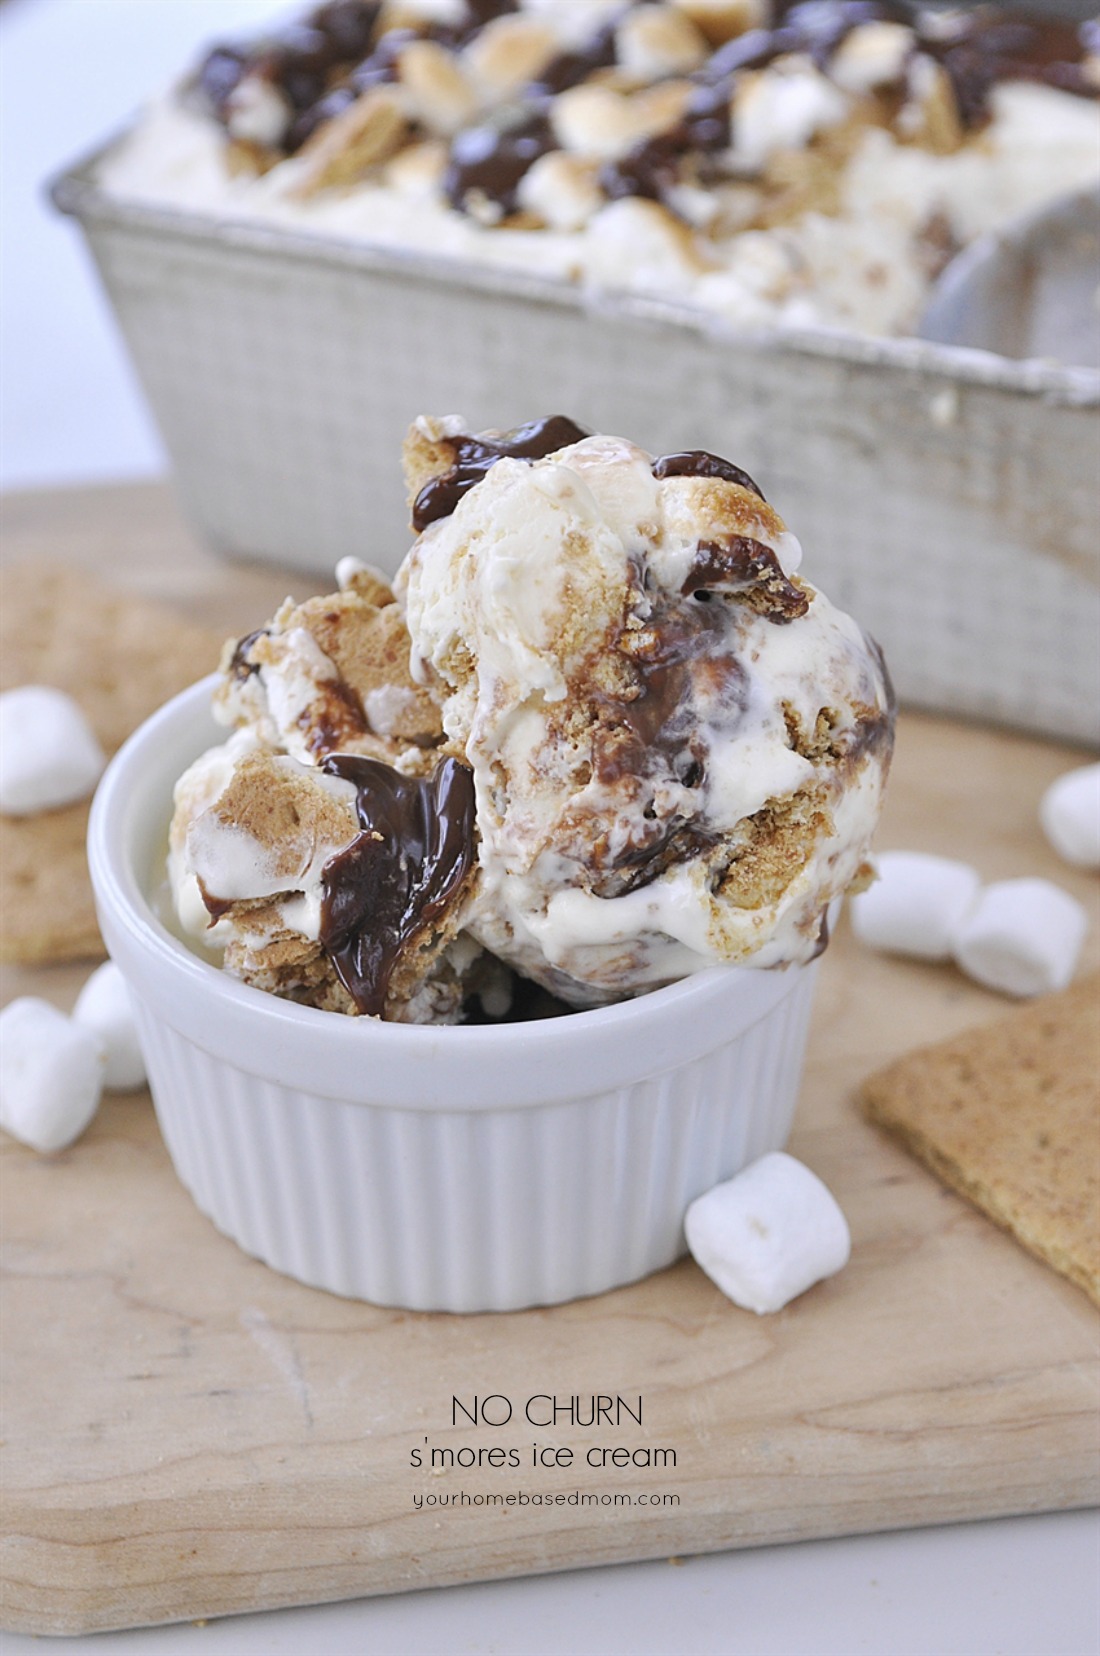 All Created - No Churn S'mores Ice Cream